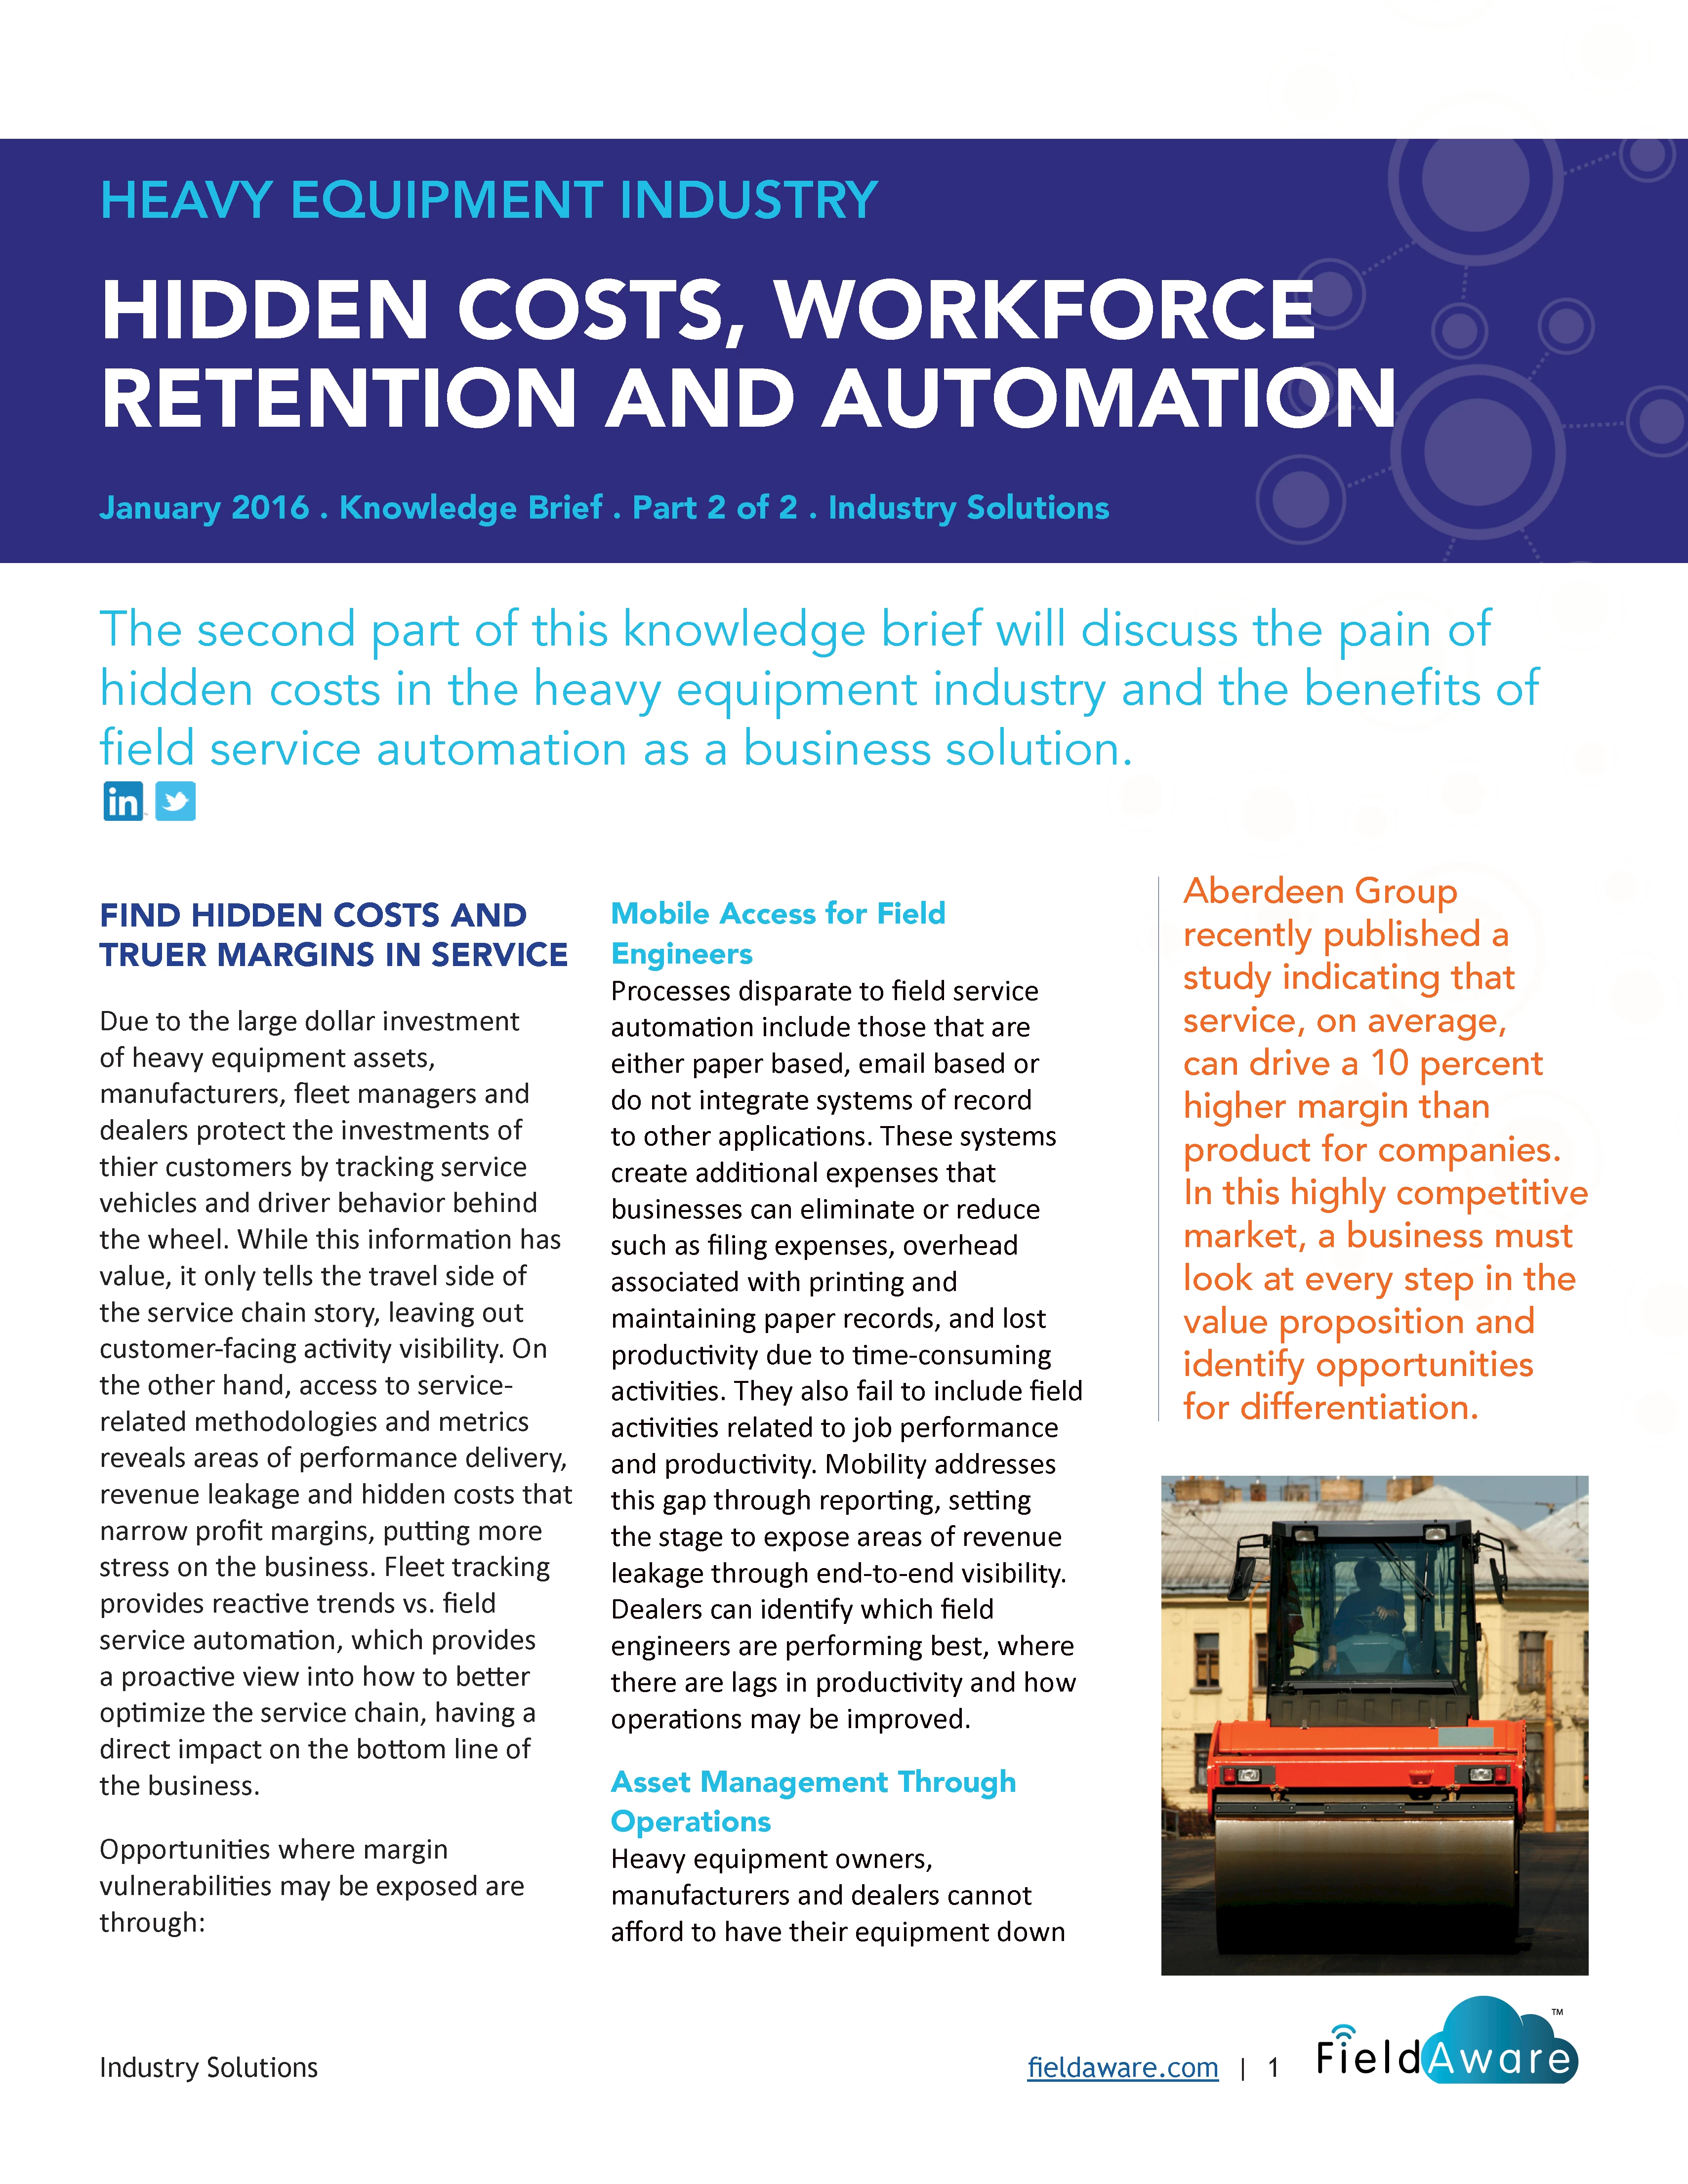 Heavy Equipment Industry Hidden Costs, Workforce Retention And Automation - Part 2 White Paper